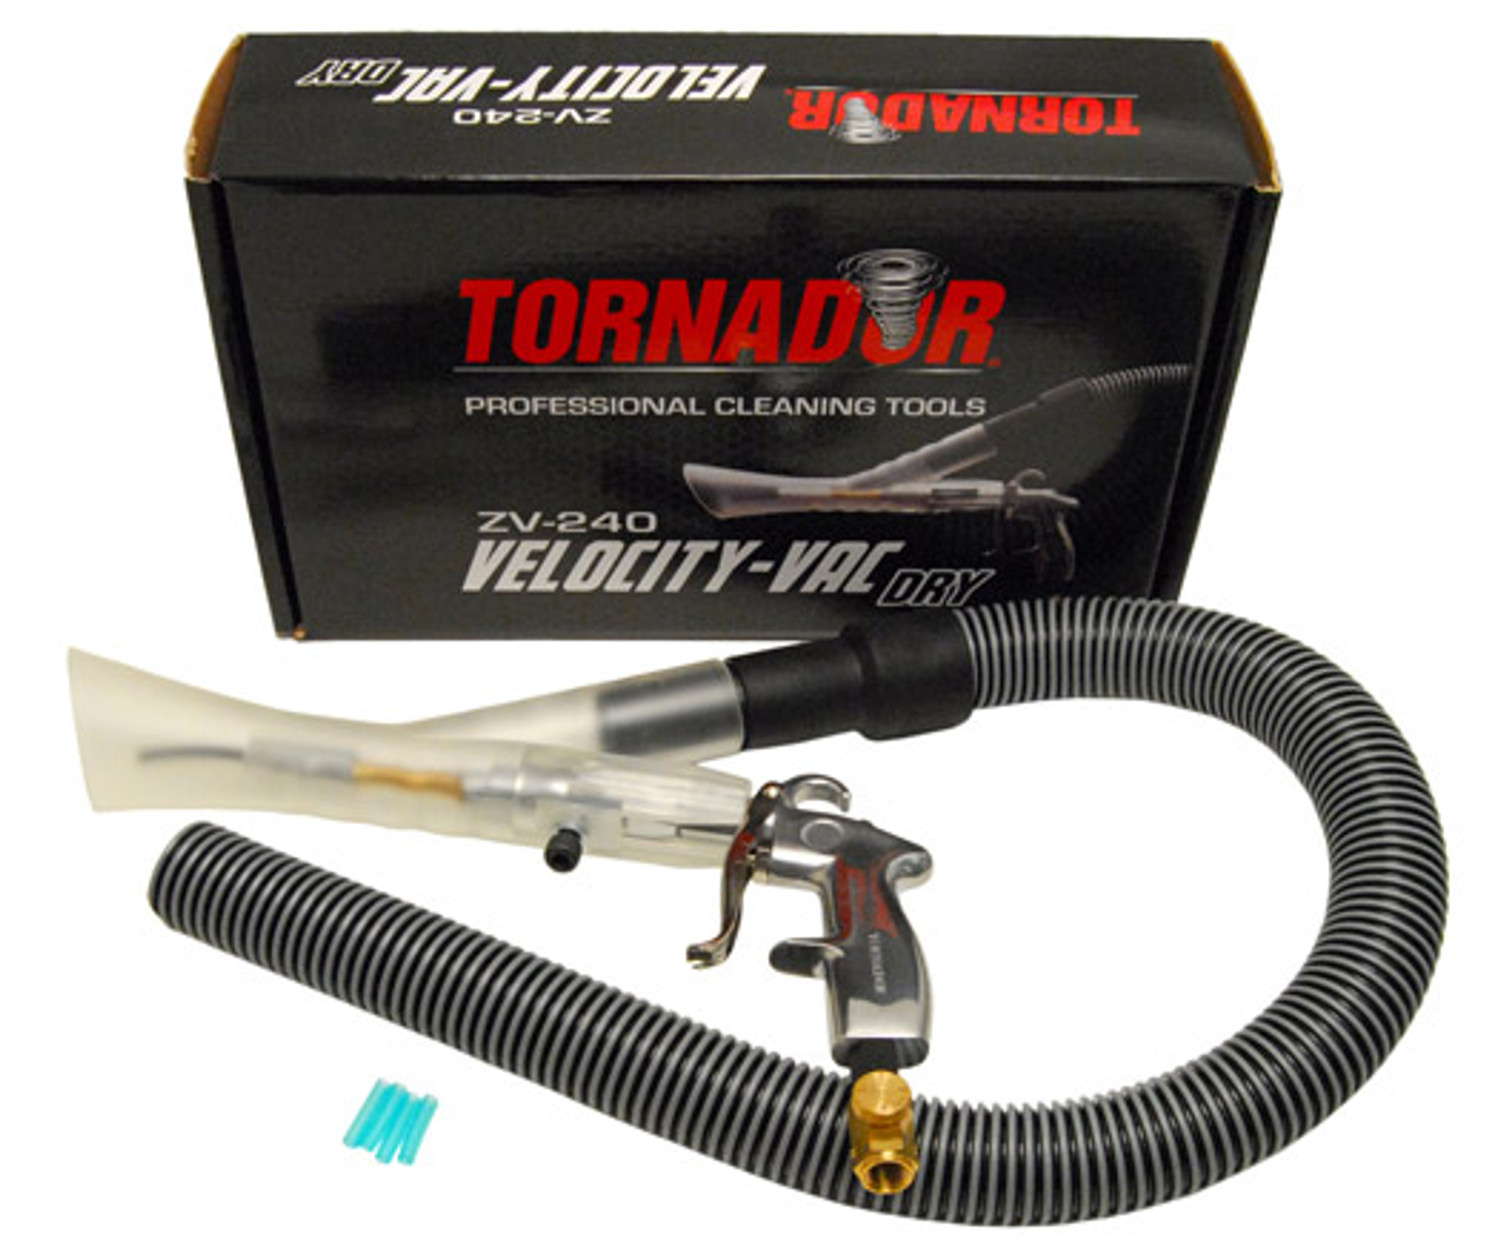 TORNADOR VELOCITY-VAC ATTACHMENT - Majestic Solutions Auto Detail Products